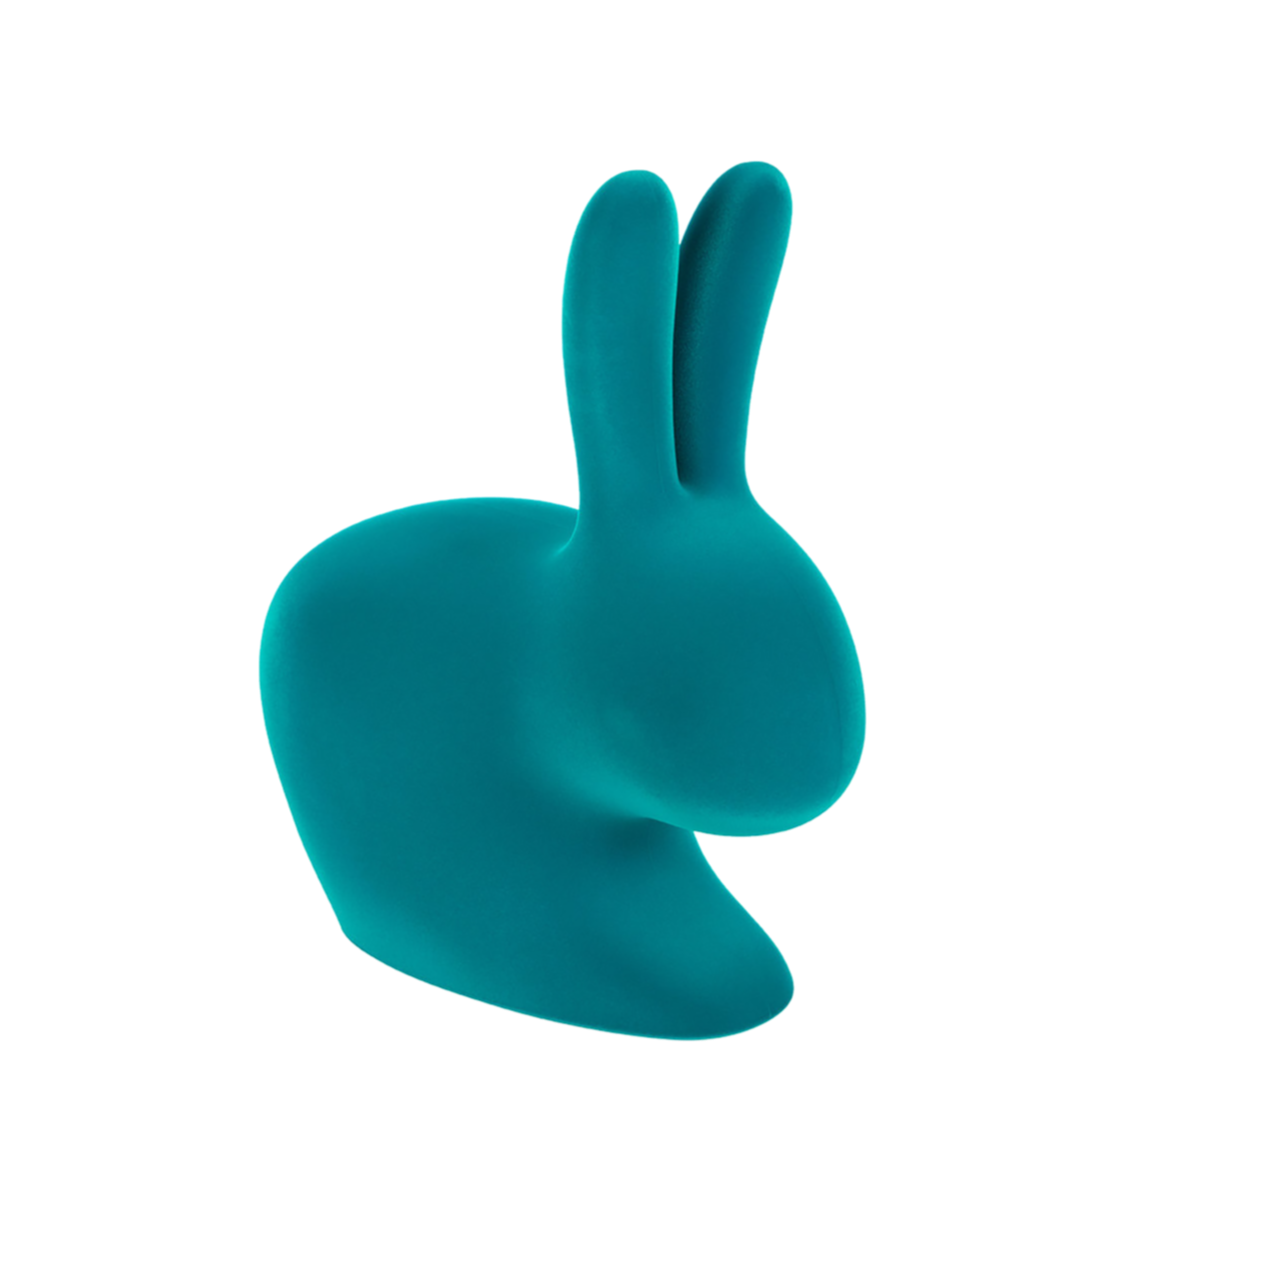 Rabbit is a pendant for a book designed by Stefano Giovannoni. A symbol of love and fertility, this toddler will bring you happiness! The velvet surface is softer to the touch.